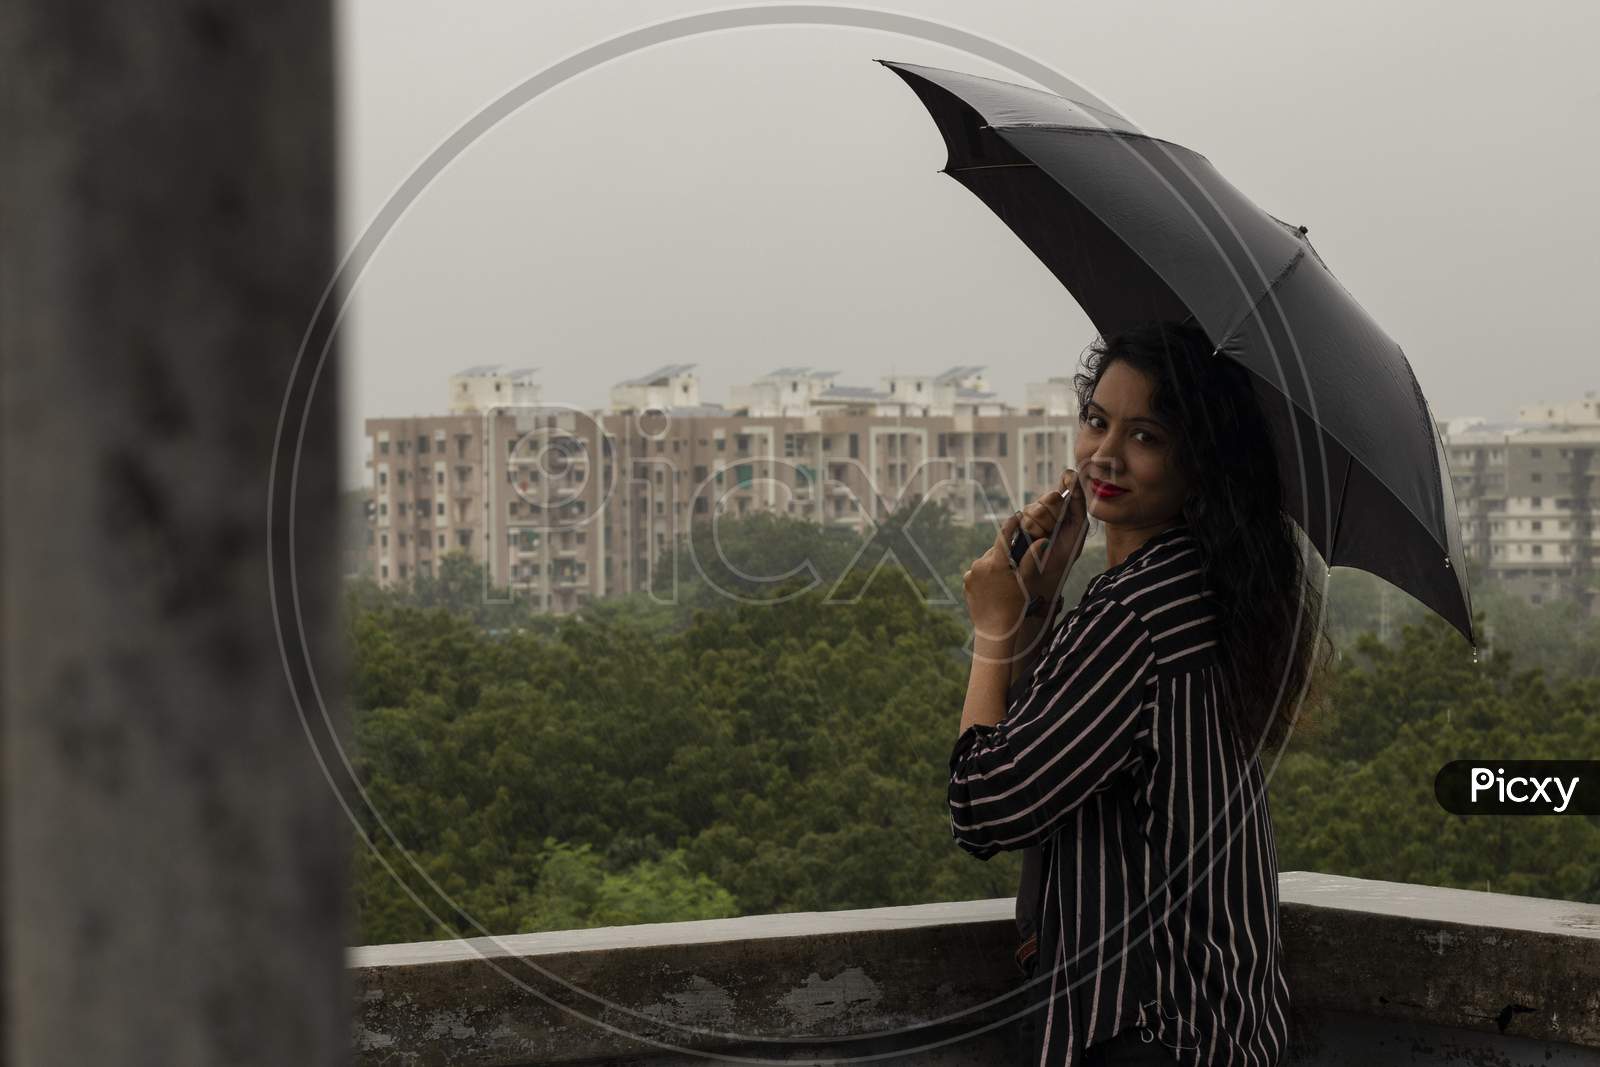 Indian Woman With Umbrella In The Rain. Looking At Camera.